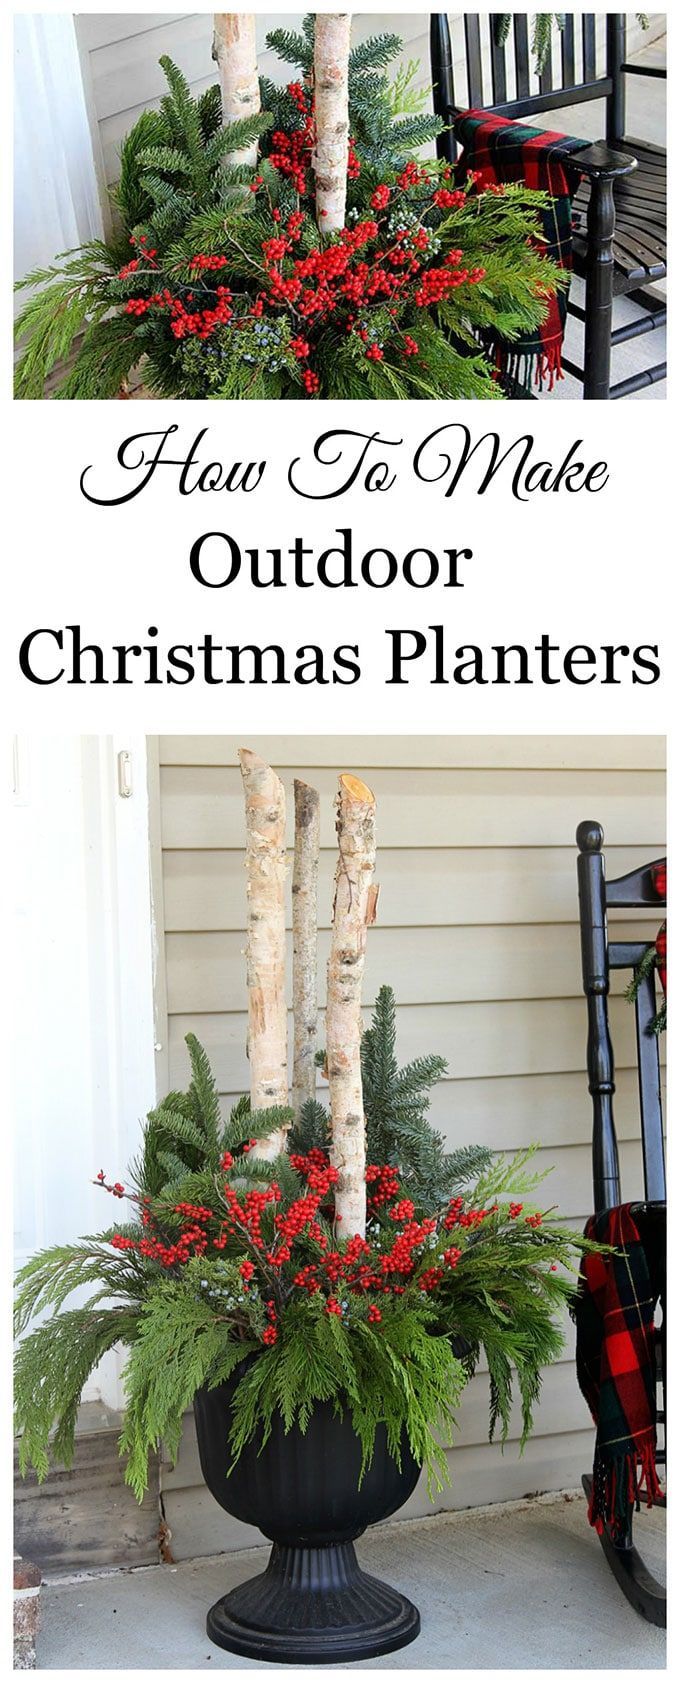 How To Make Outdoor Christmas Planters